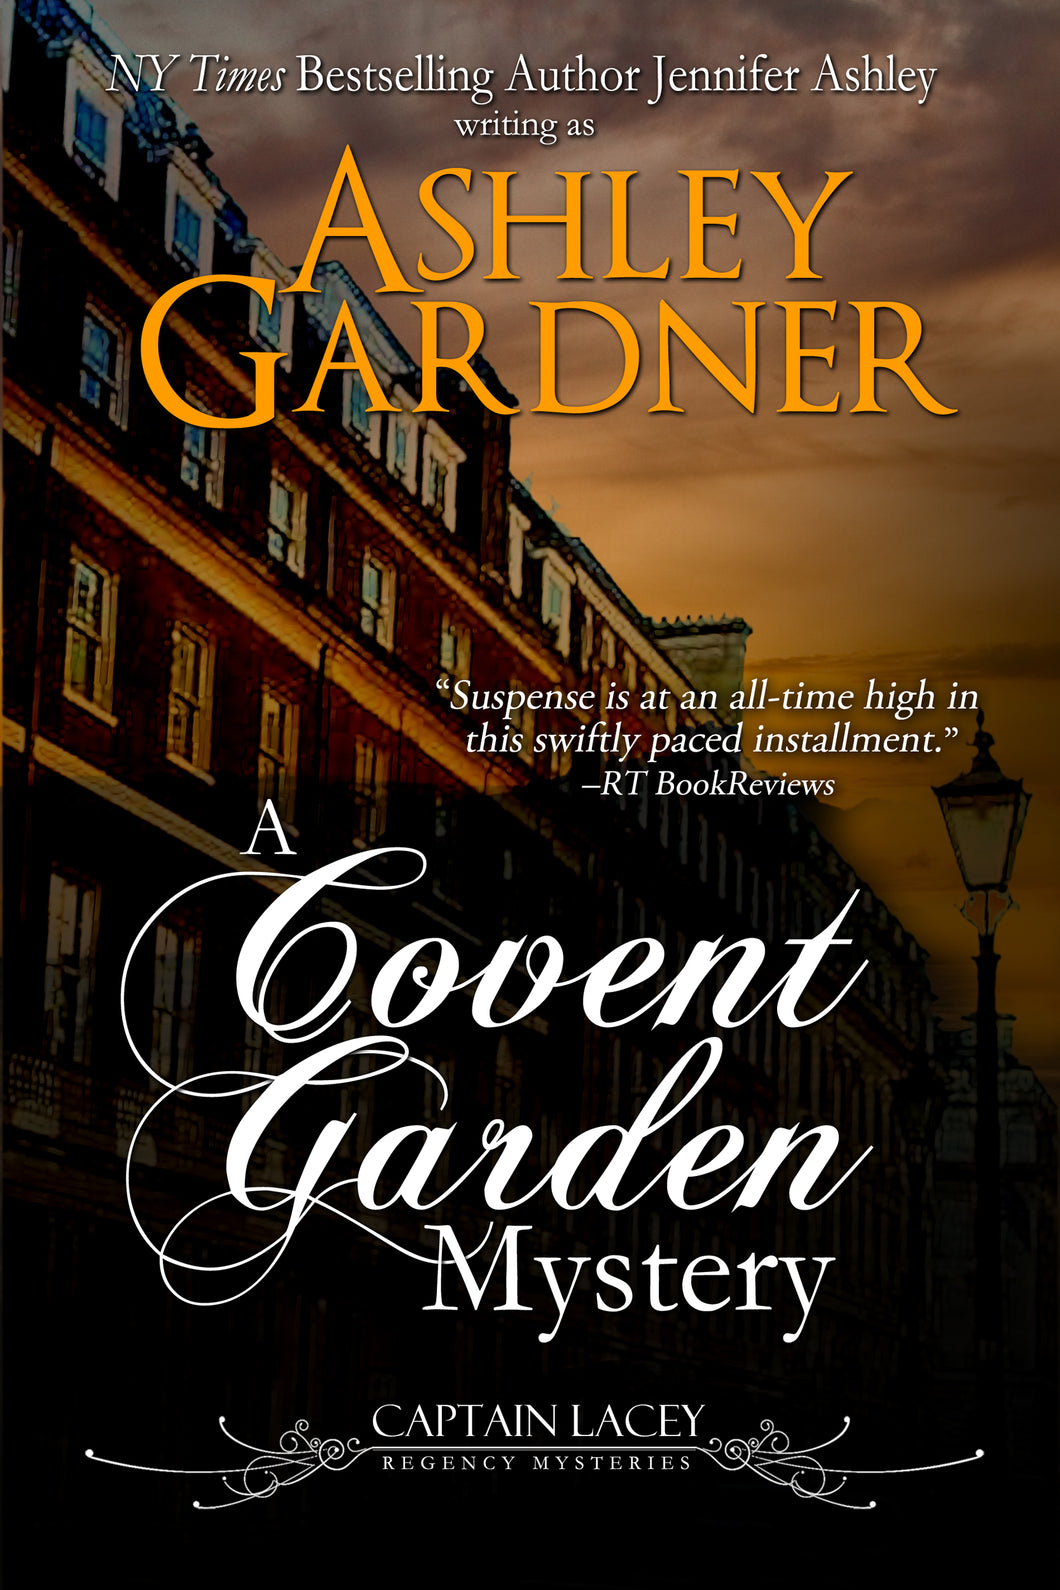 A Covent Garden Mystery (Captain Lacey Regency Mysteries, Book 6)